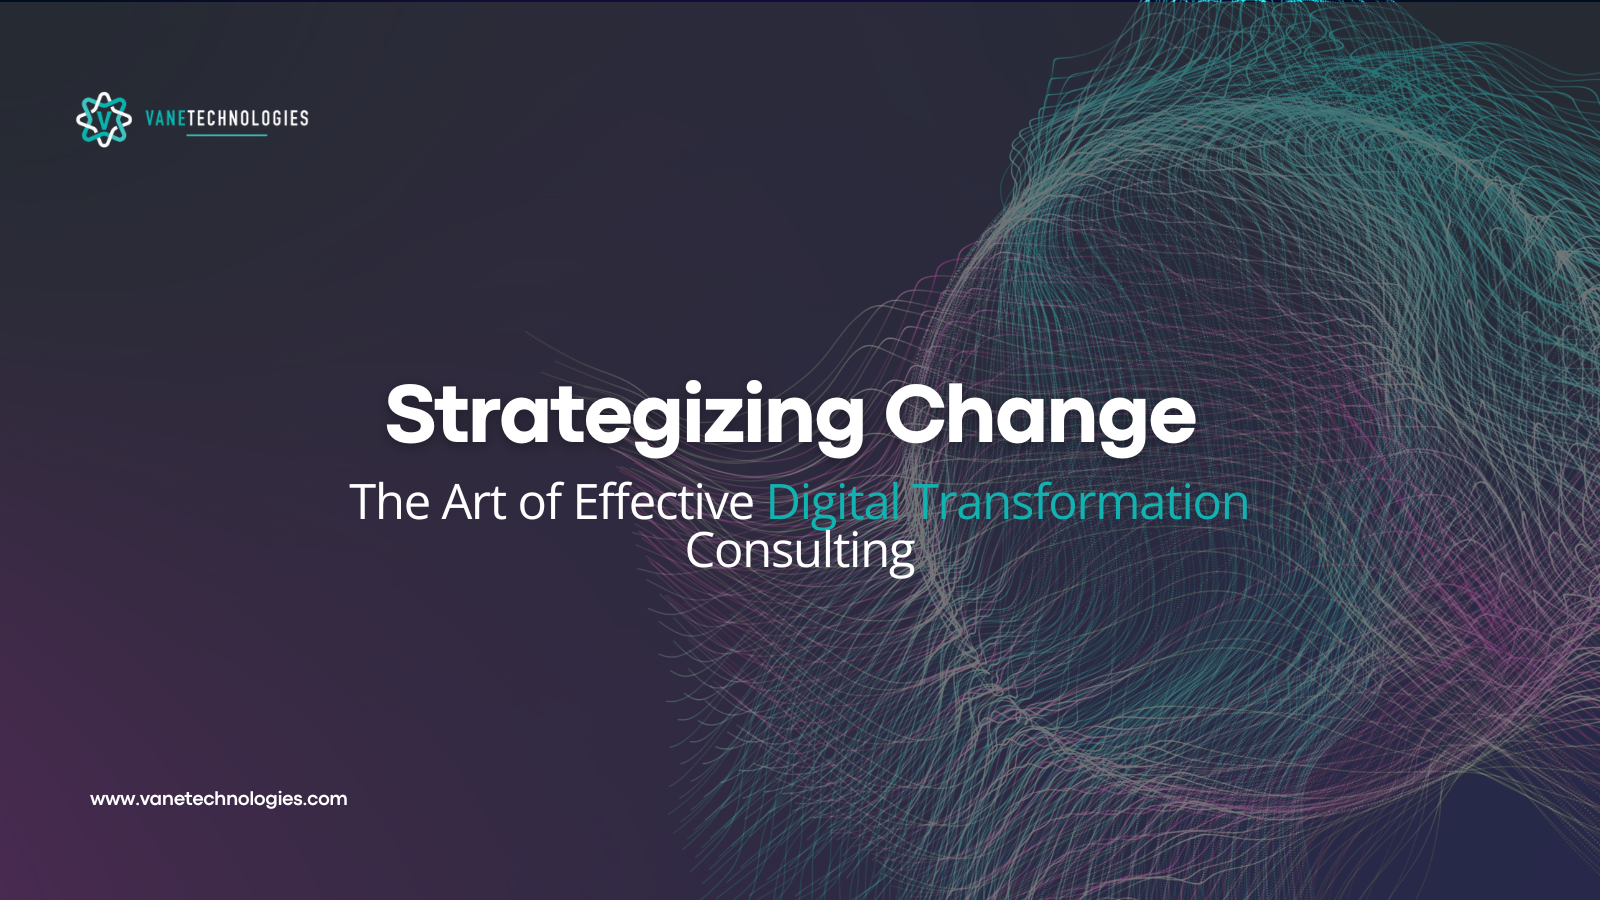 Strategizing Change: The Art of Effective Digital Transformation Consulting